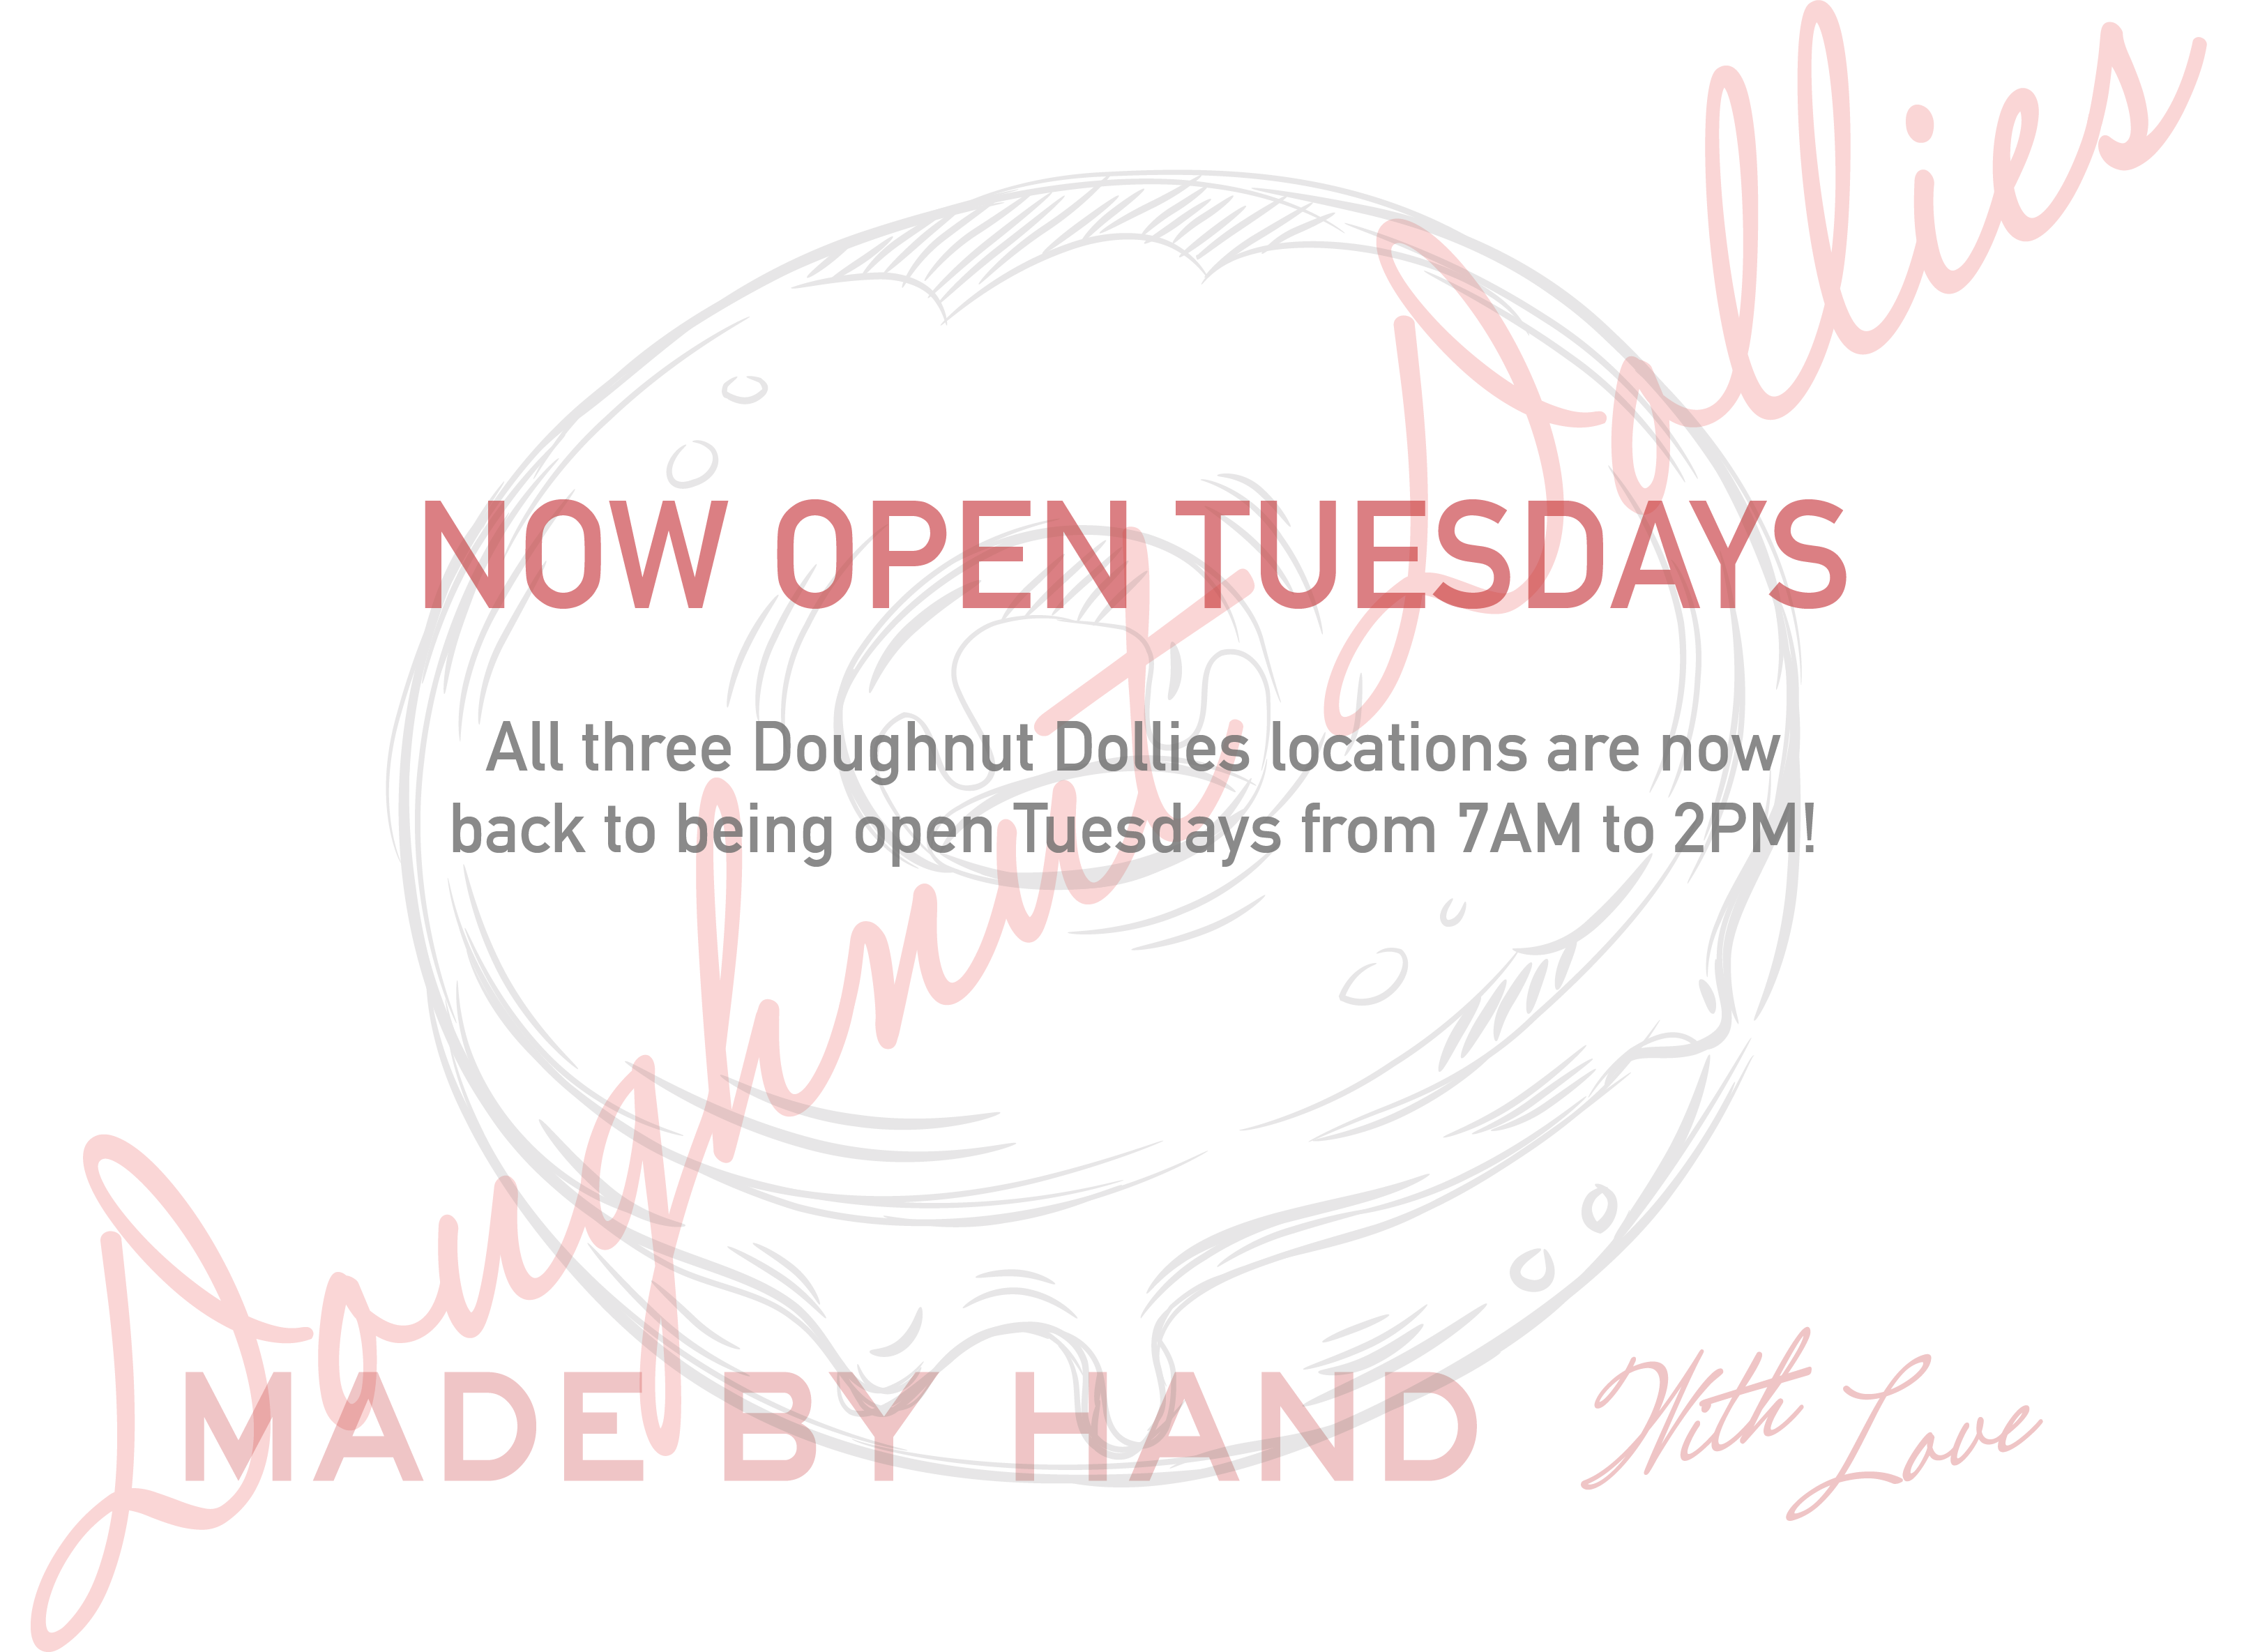 Now Open Tuesdays from 7AM to 2PM